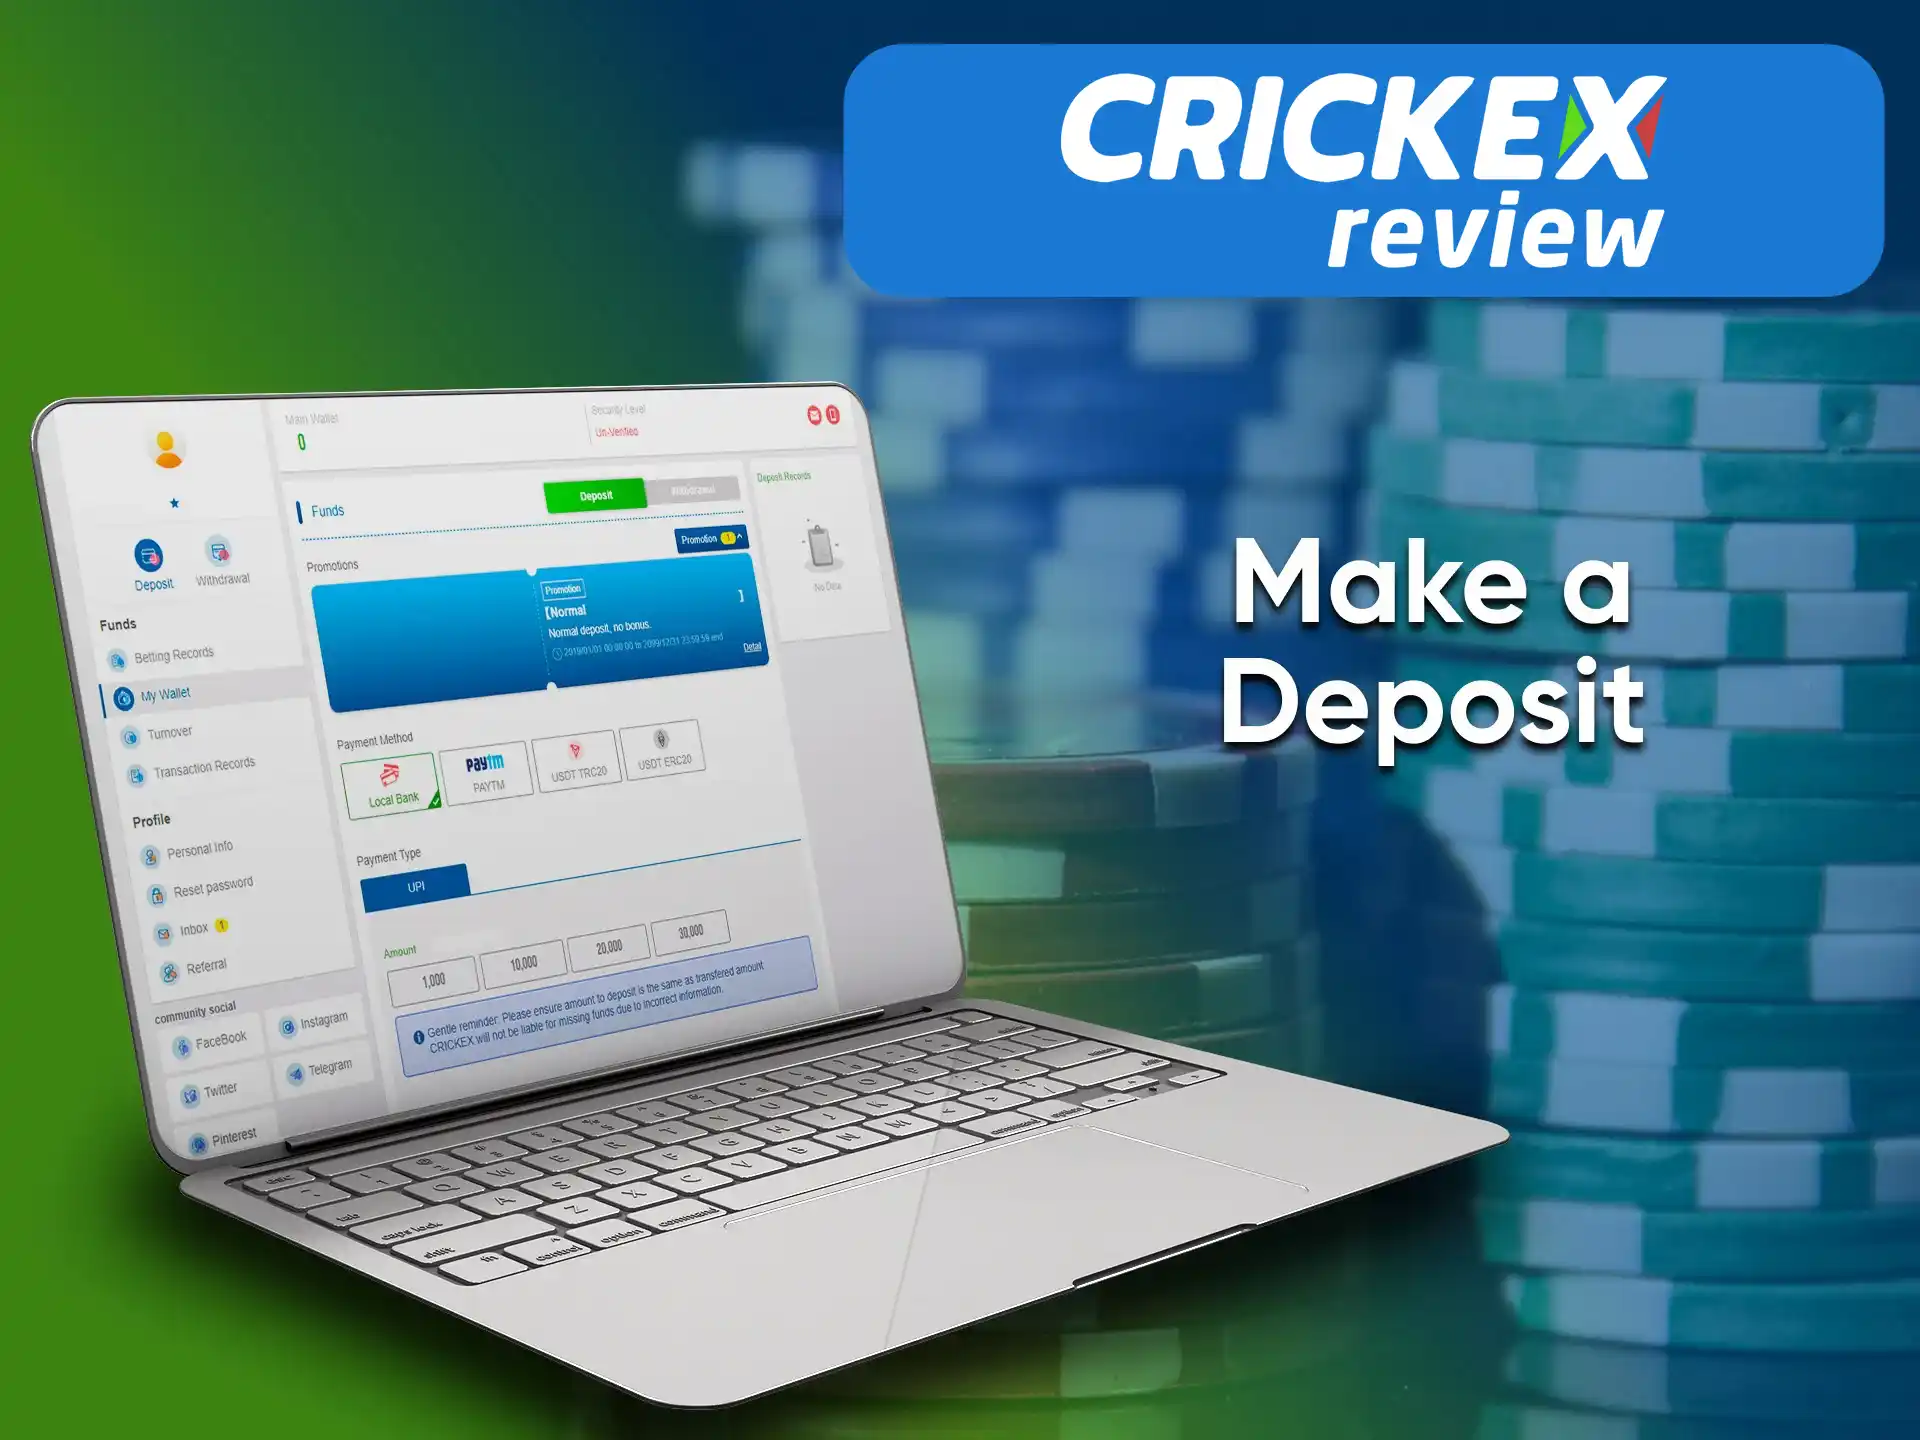 To play at Crickex casino, you need to make a deposit in a convenient way for you.